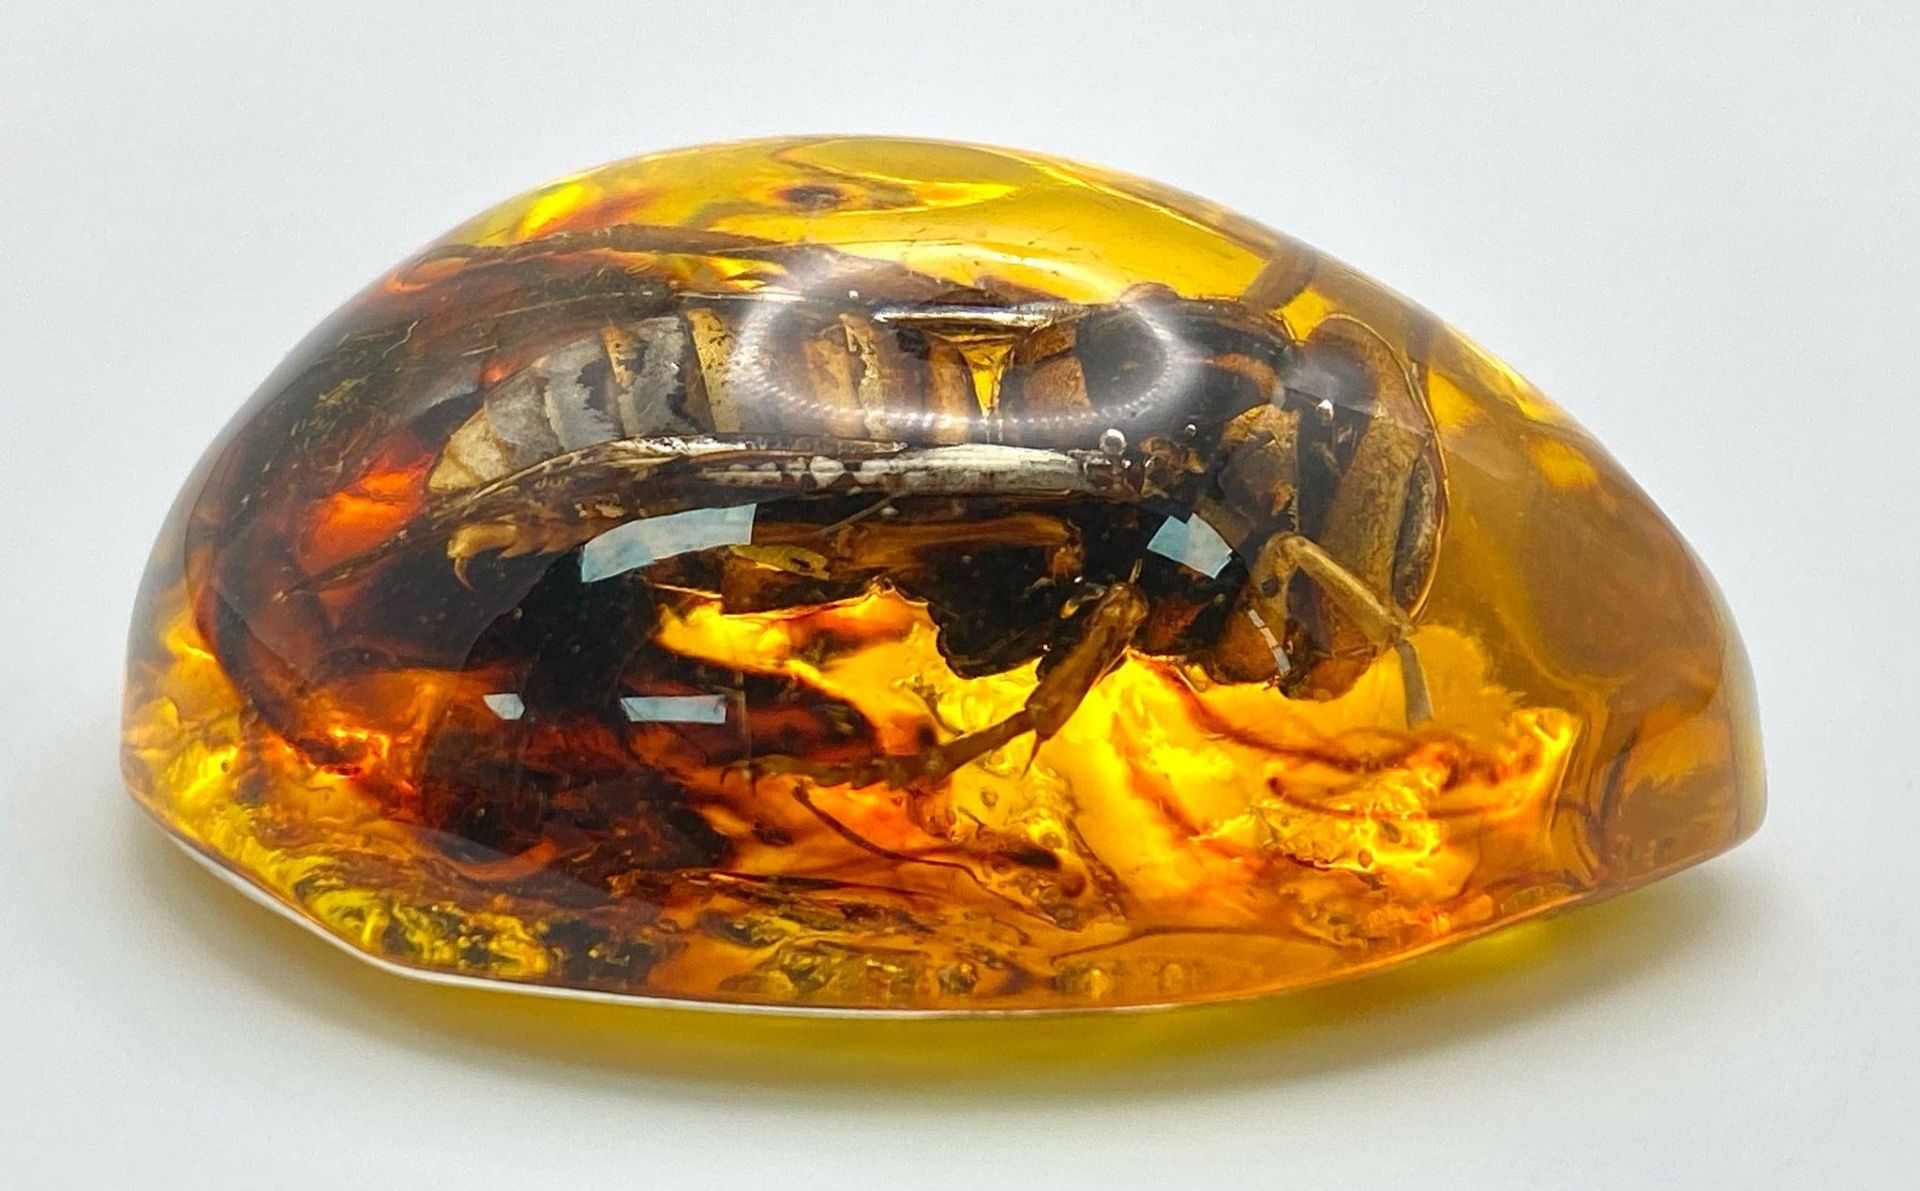 A Rather Large Asian Hornet Relaxes in an Amber Resin Bath. Pendant or paperweight. 6cm - Bild 2 aus 2